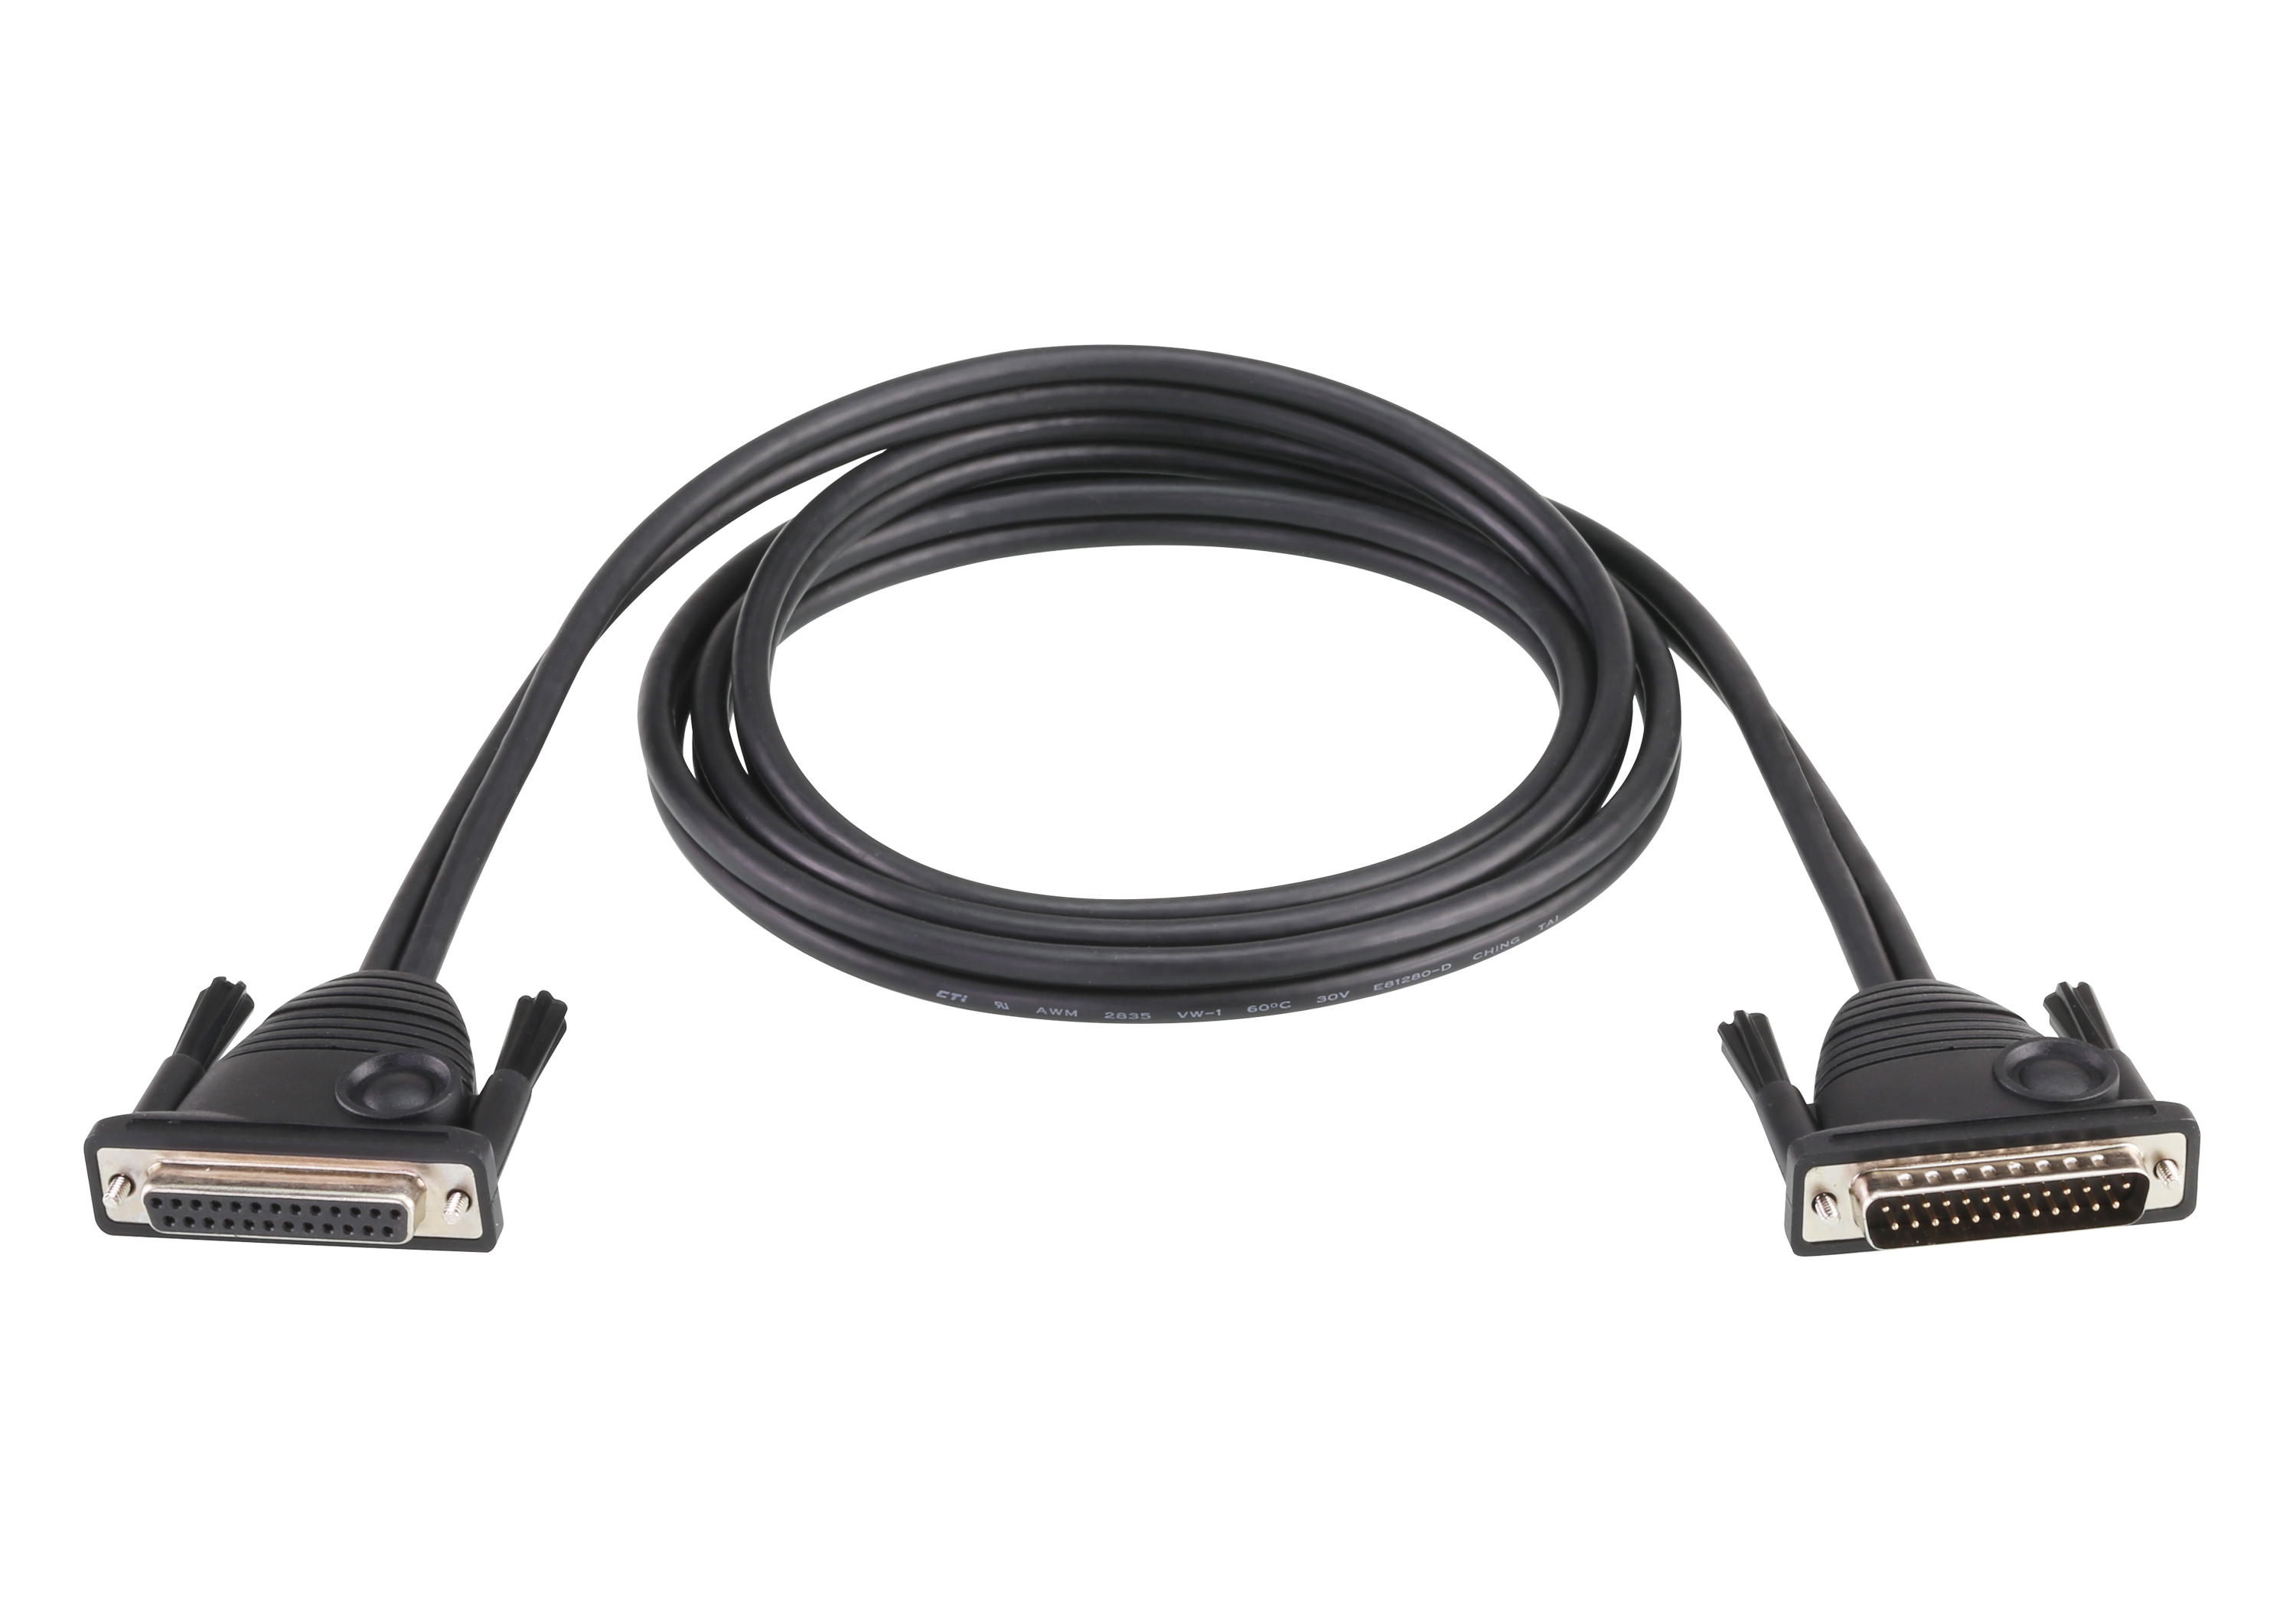 ATEN Daisy Chain Cable - Kabel seriell - DB-25 (M)